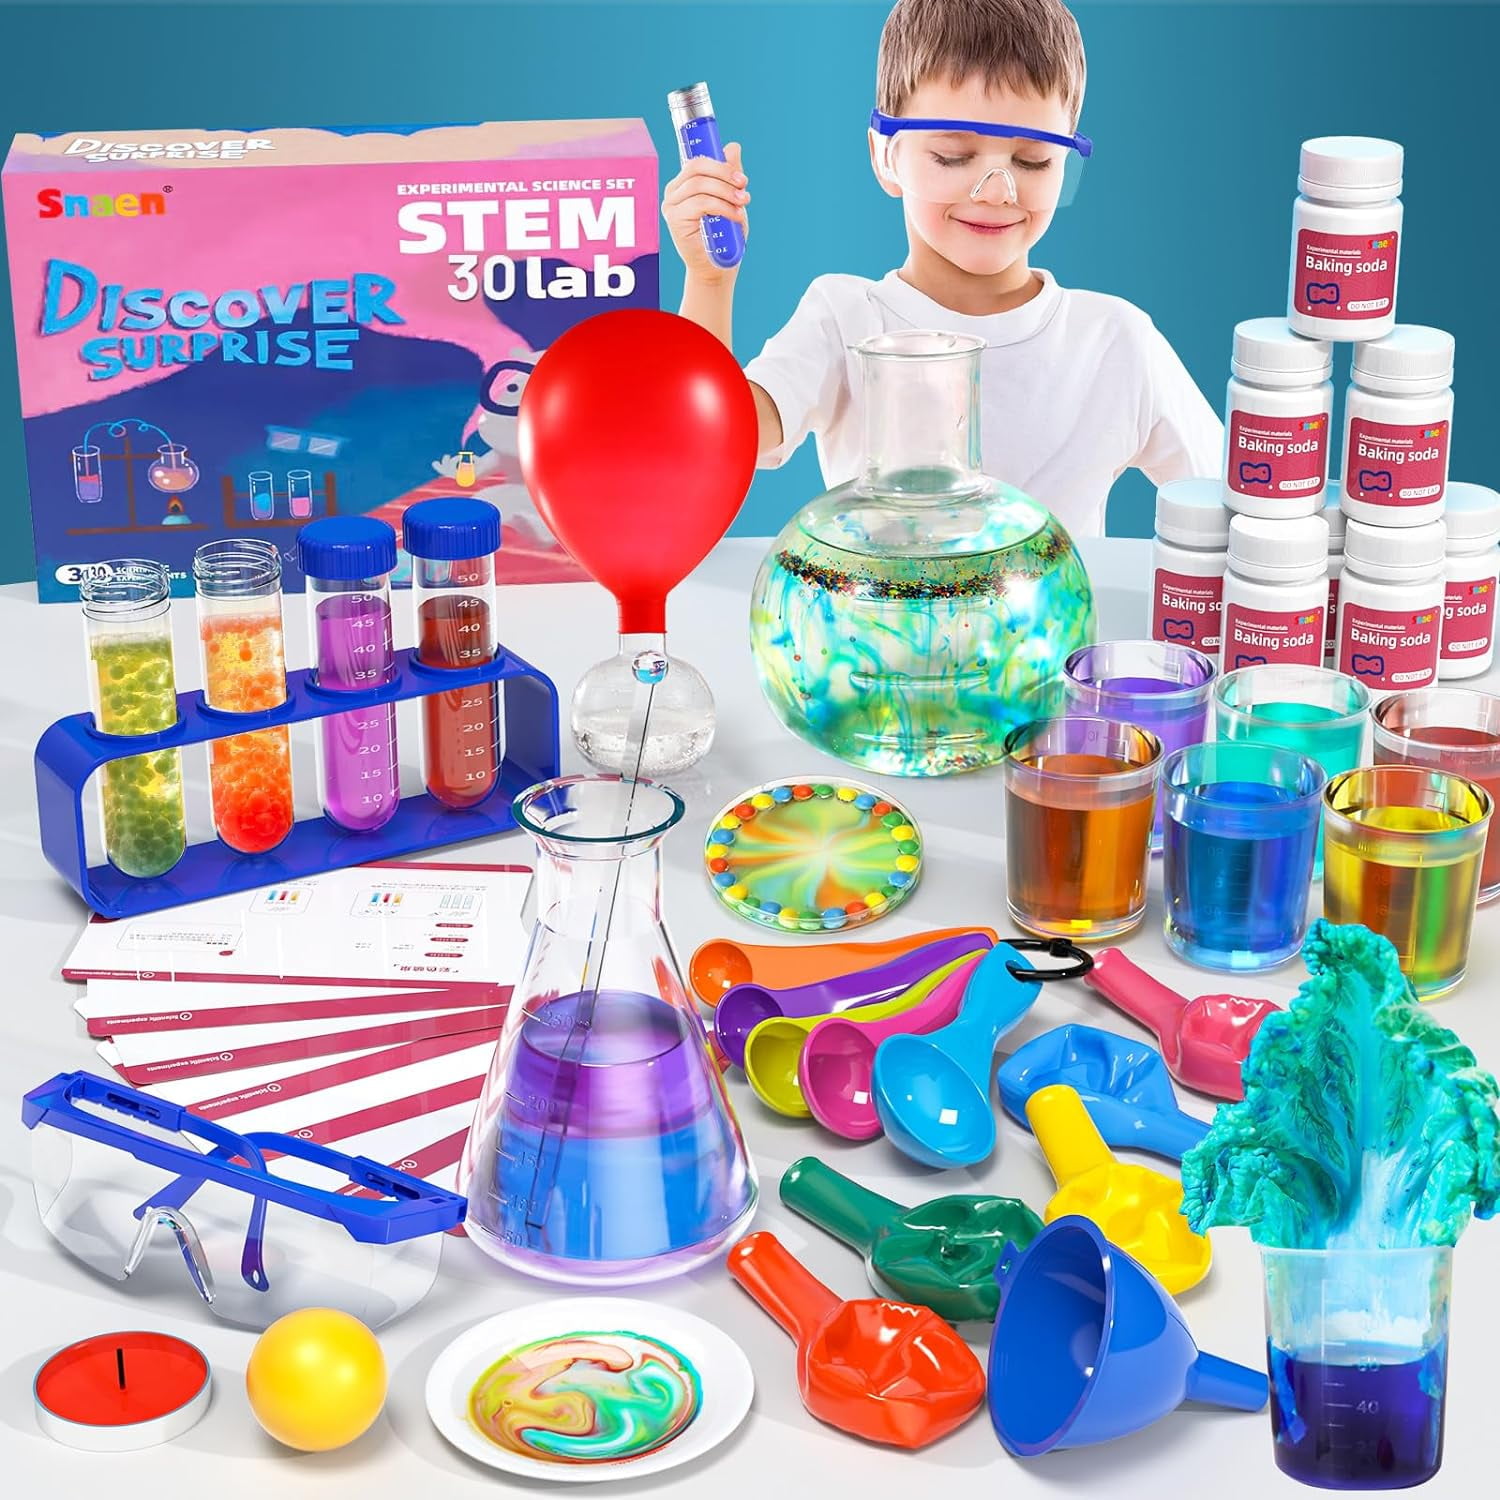 Top 11 DIY science kits for kids - Non-Toy Gifts